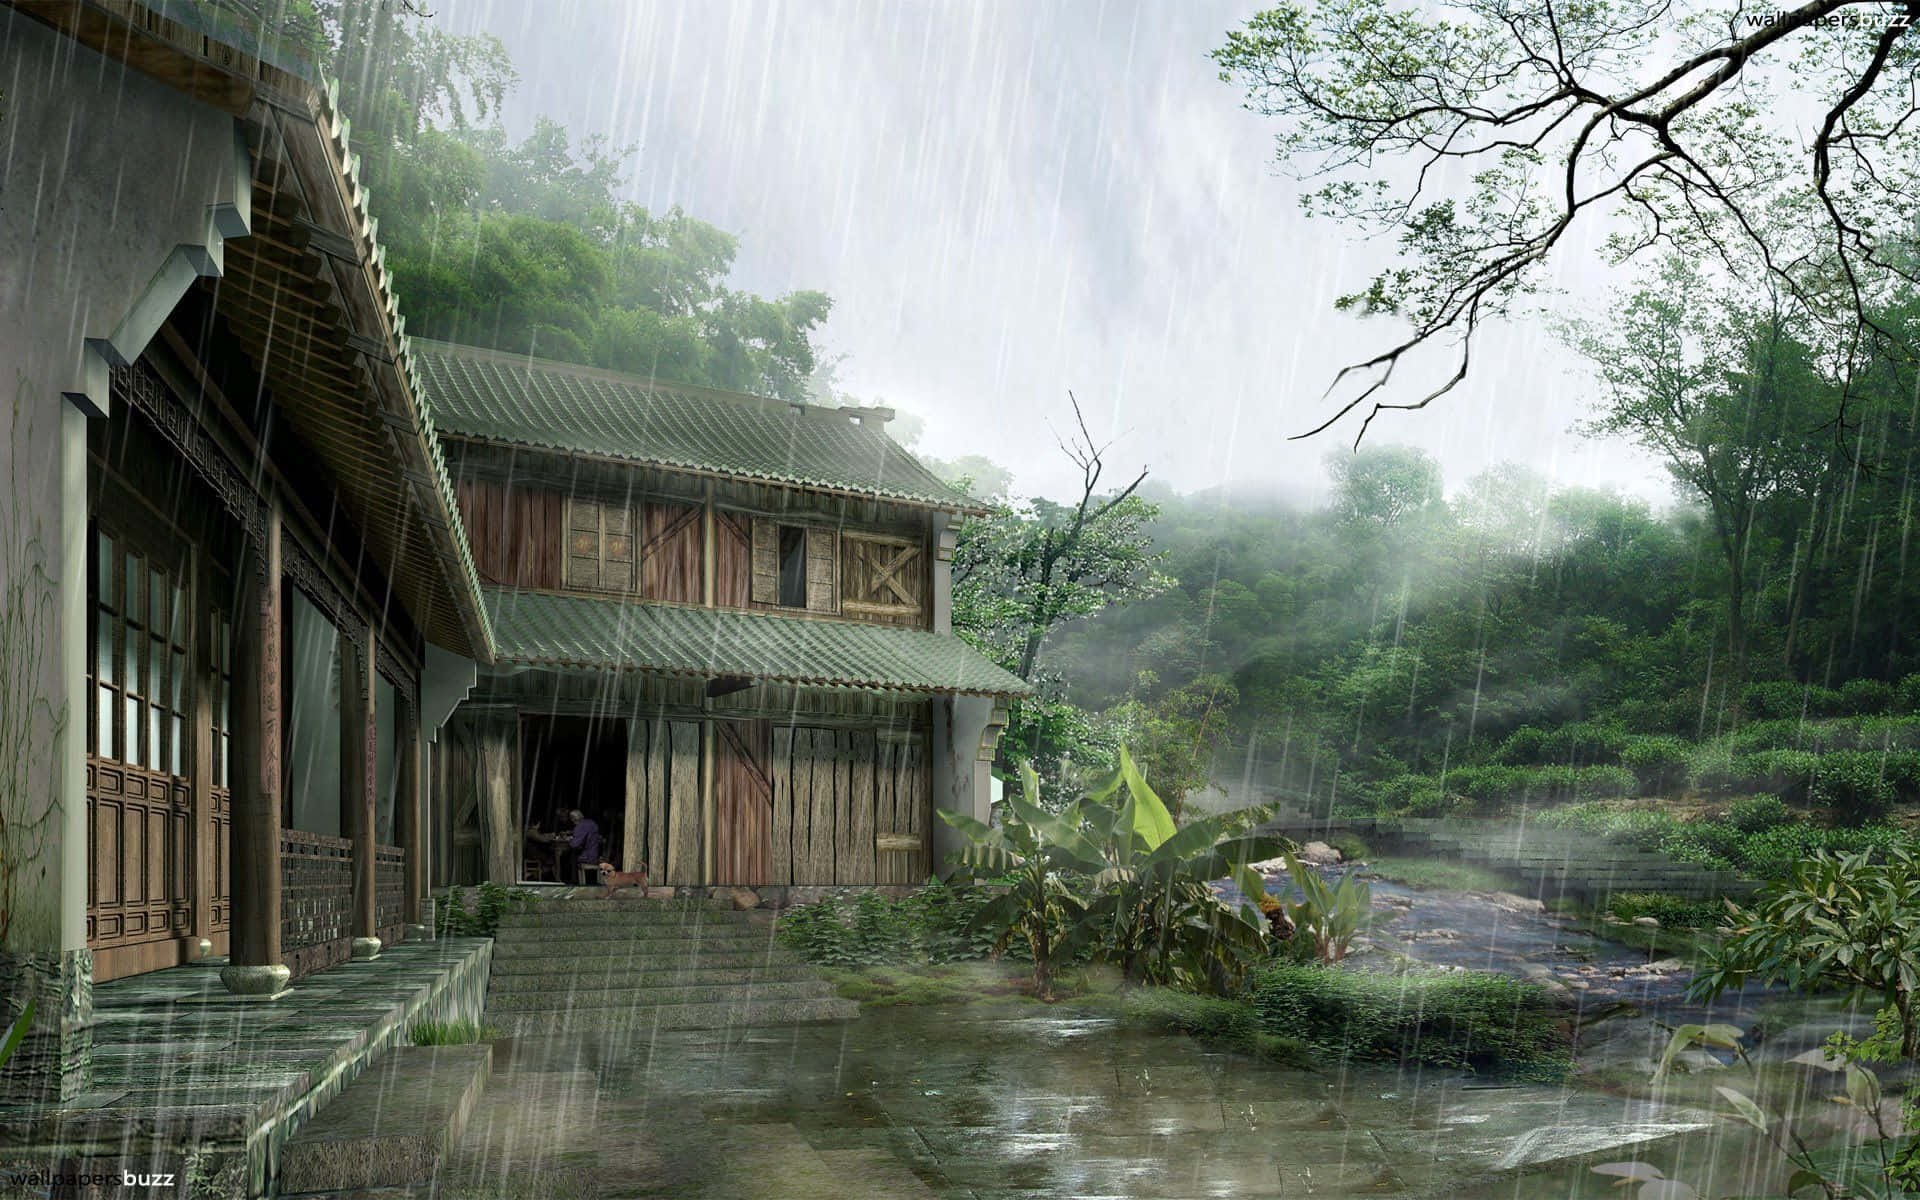 Enjoy the tranquility of a rainy day from your desktop. Wallpaper